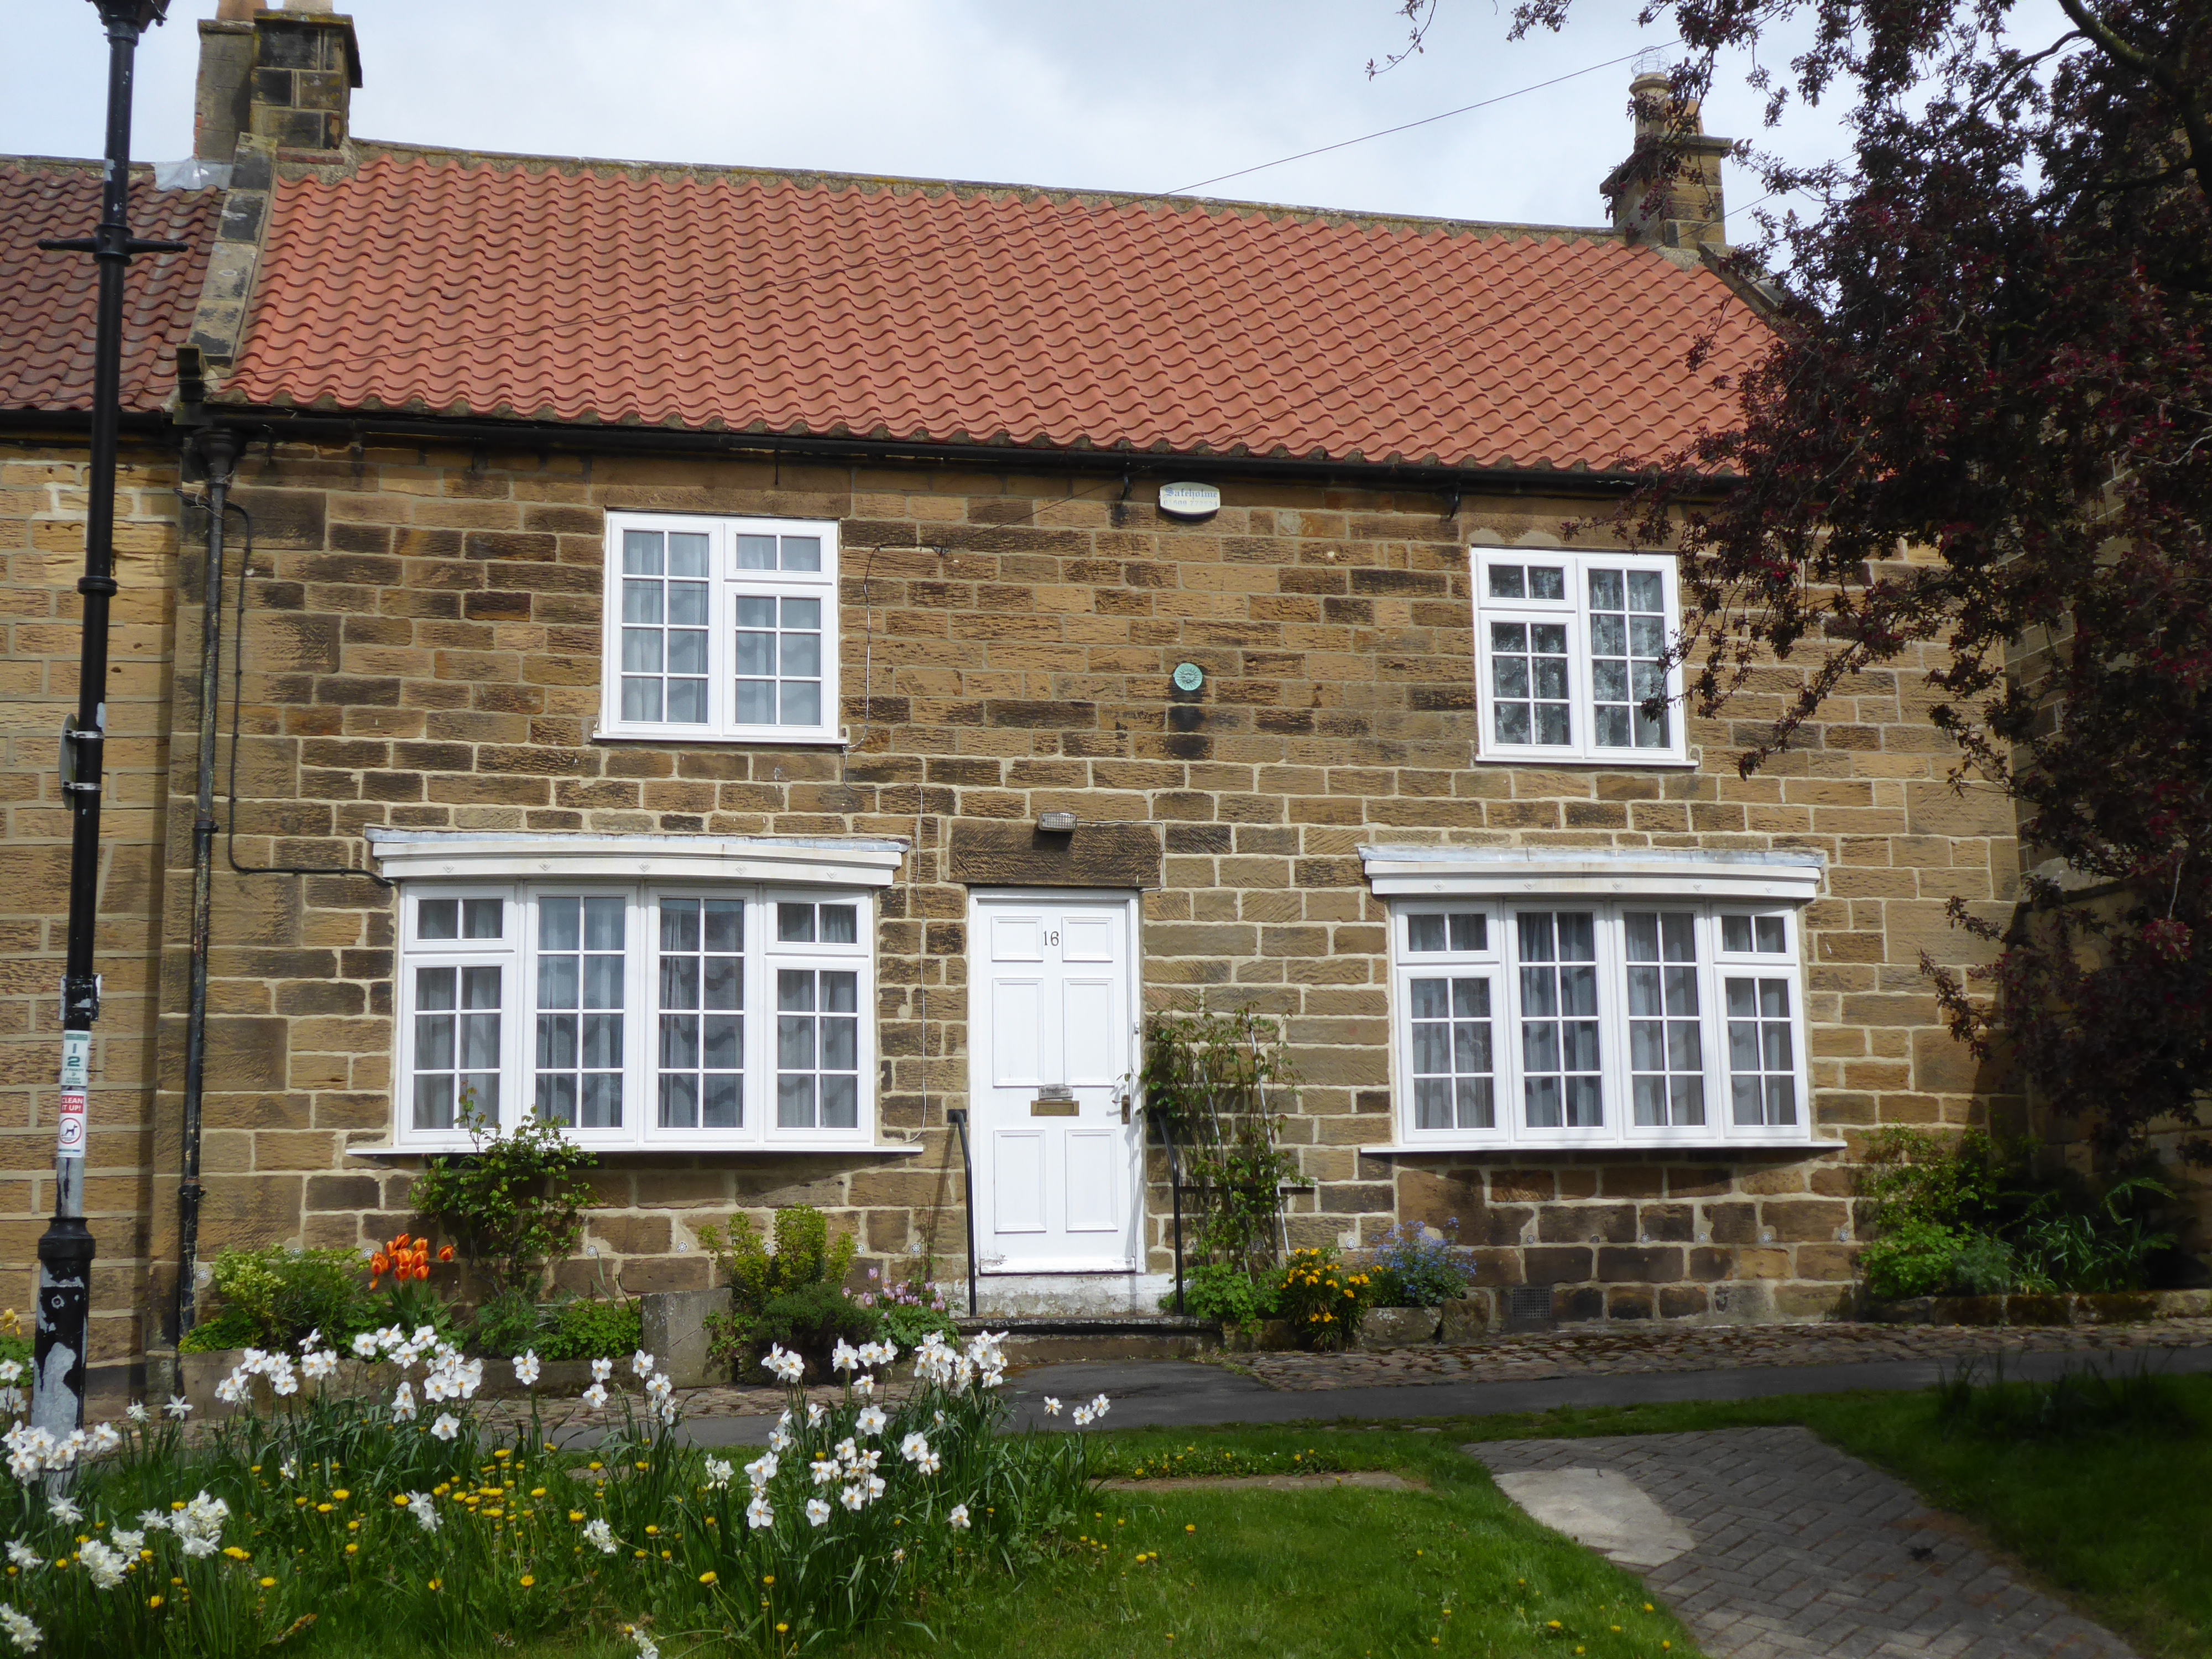 16 West End, Osmotherley